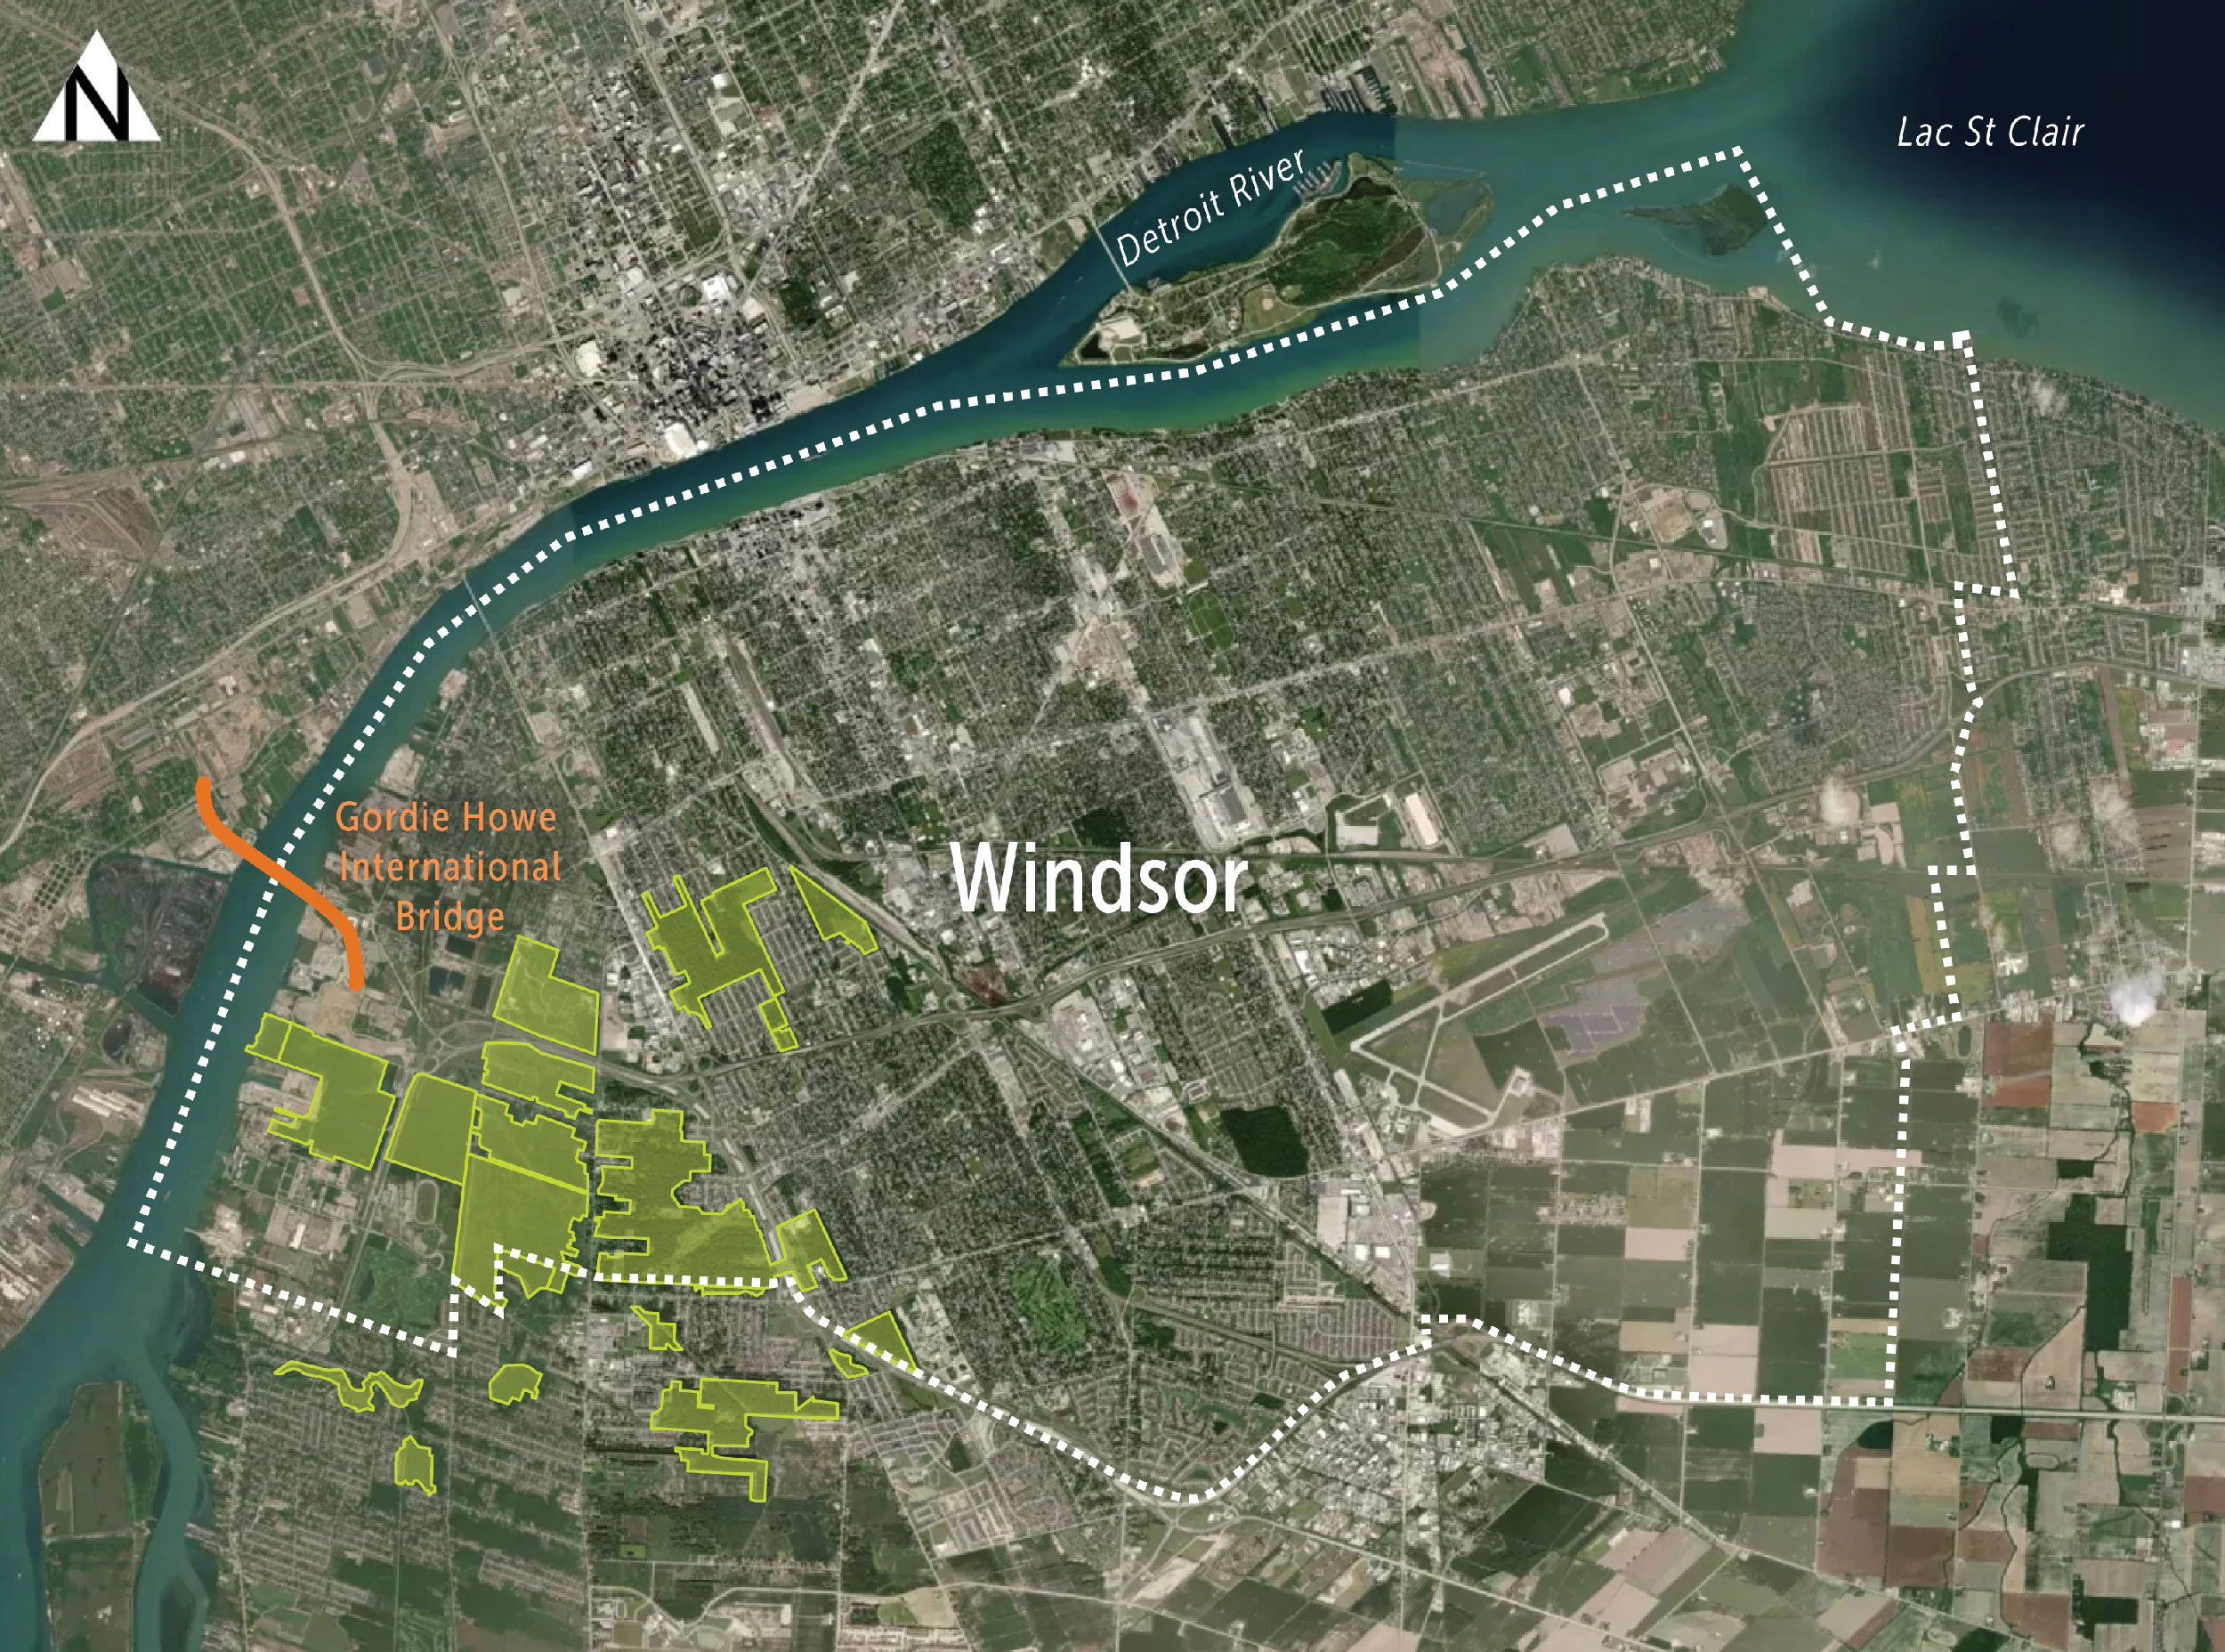 Ontario park: Map of Windsor, Ontario and surrounding area highlighting proposed Urban National Park.